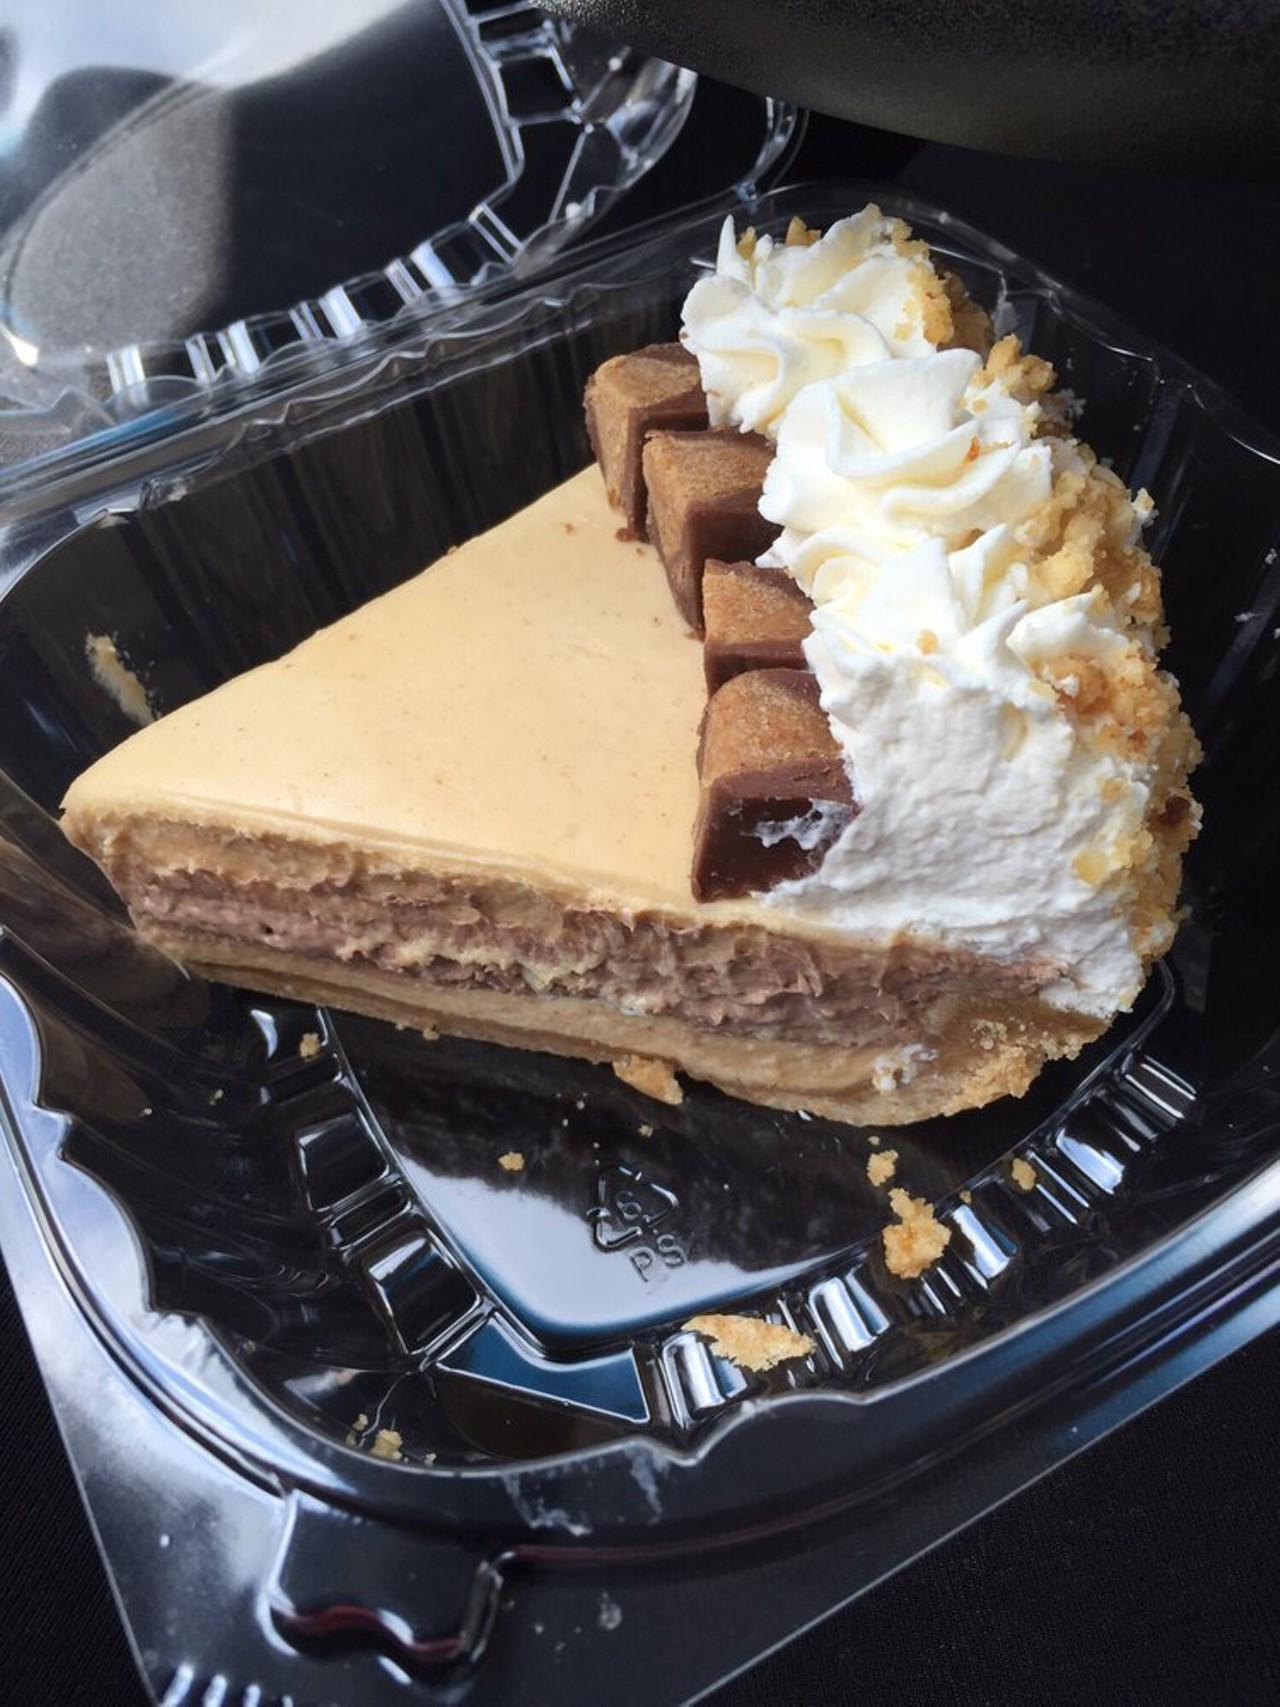 Sister Honey&#146;s
247 E. Michigan St., 407-730-7315
If stopping in for a whole cake or pie, definitely order ahead. Try the award-winning peanut butter satin cake with peanut butter cups, honey roasted peanuts, whipped cream and layers upon layers of peanut butter.
Photo via Alicia H./Yelp